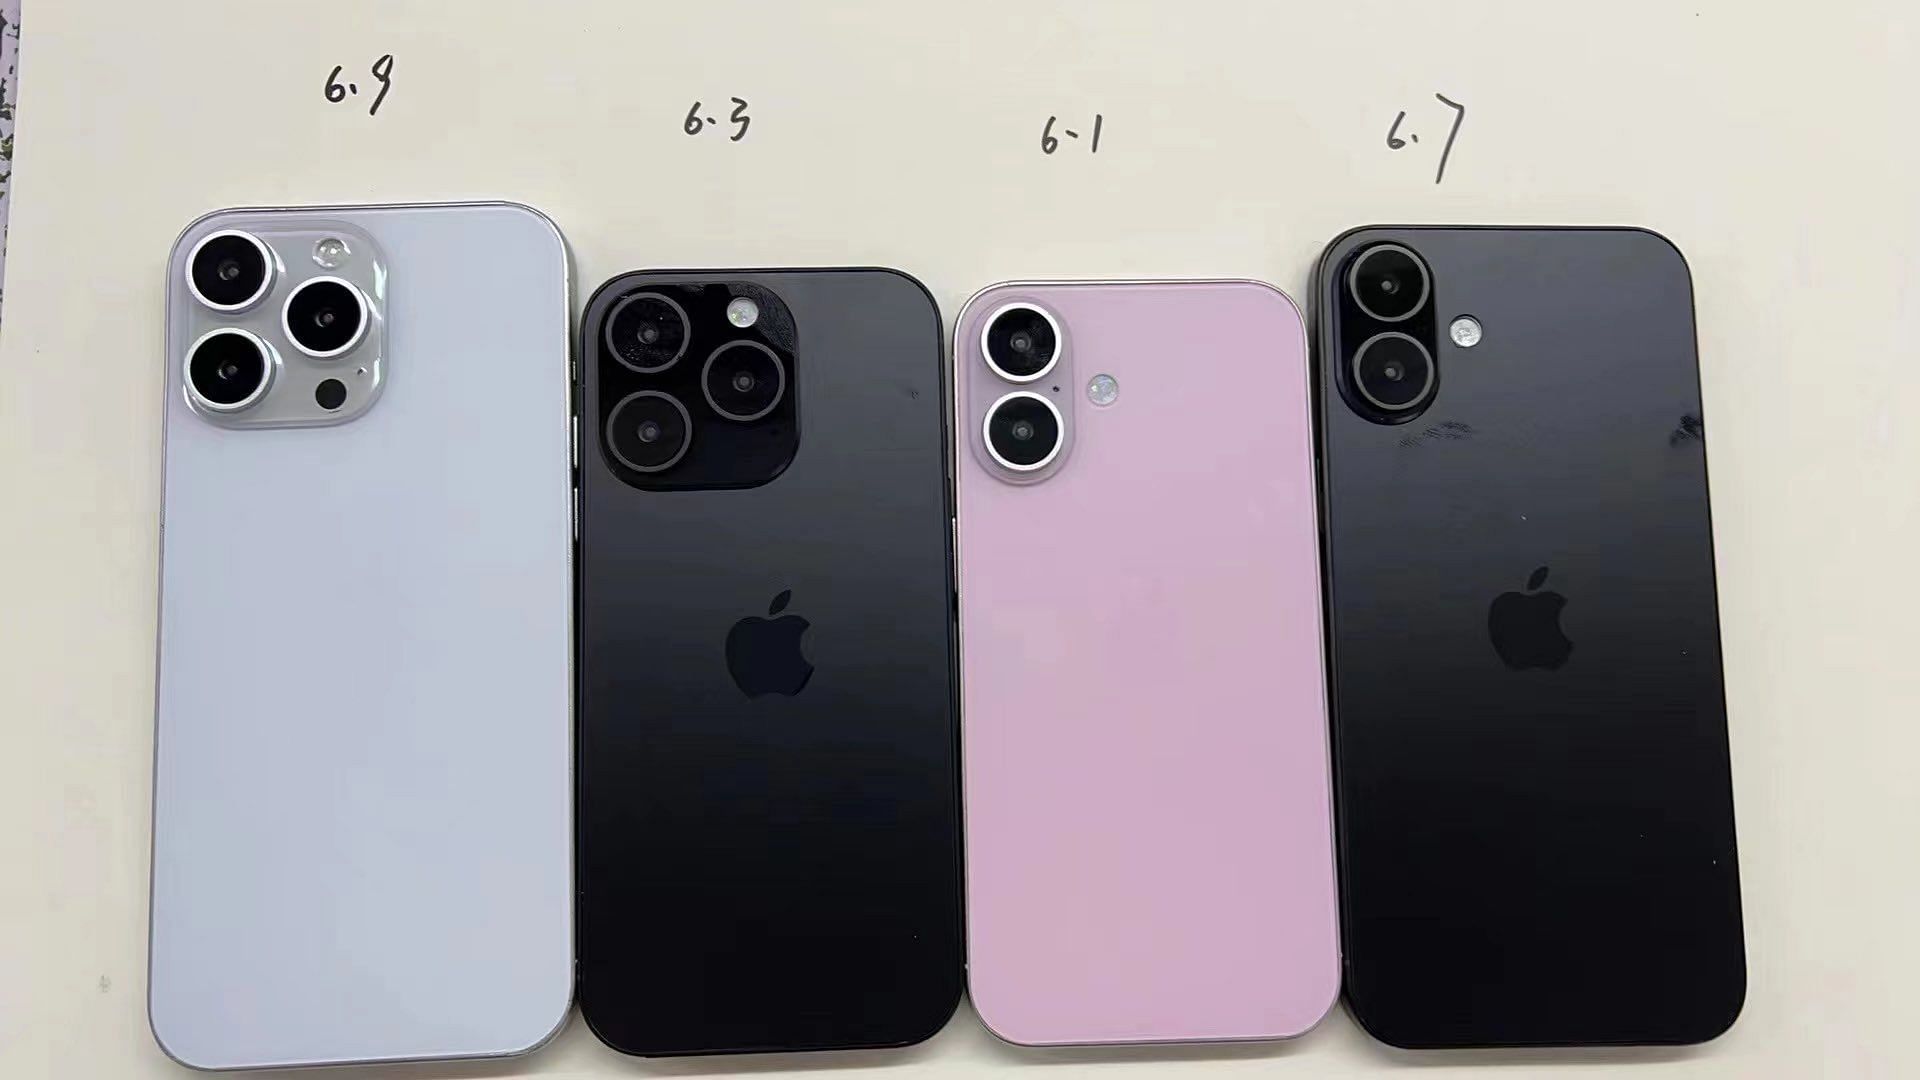 The new iPhone 16 is rumored to get larger screen sizes and a new design (Image via @SonnyDickson/X)